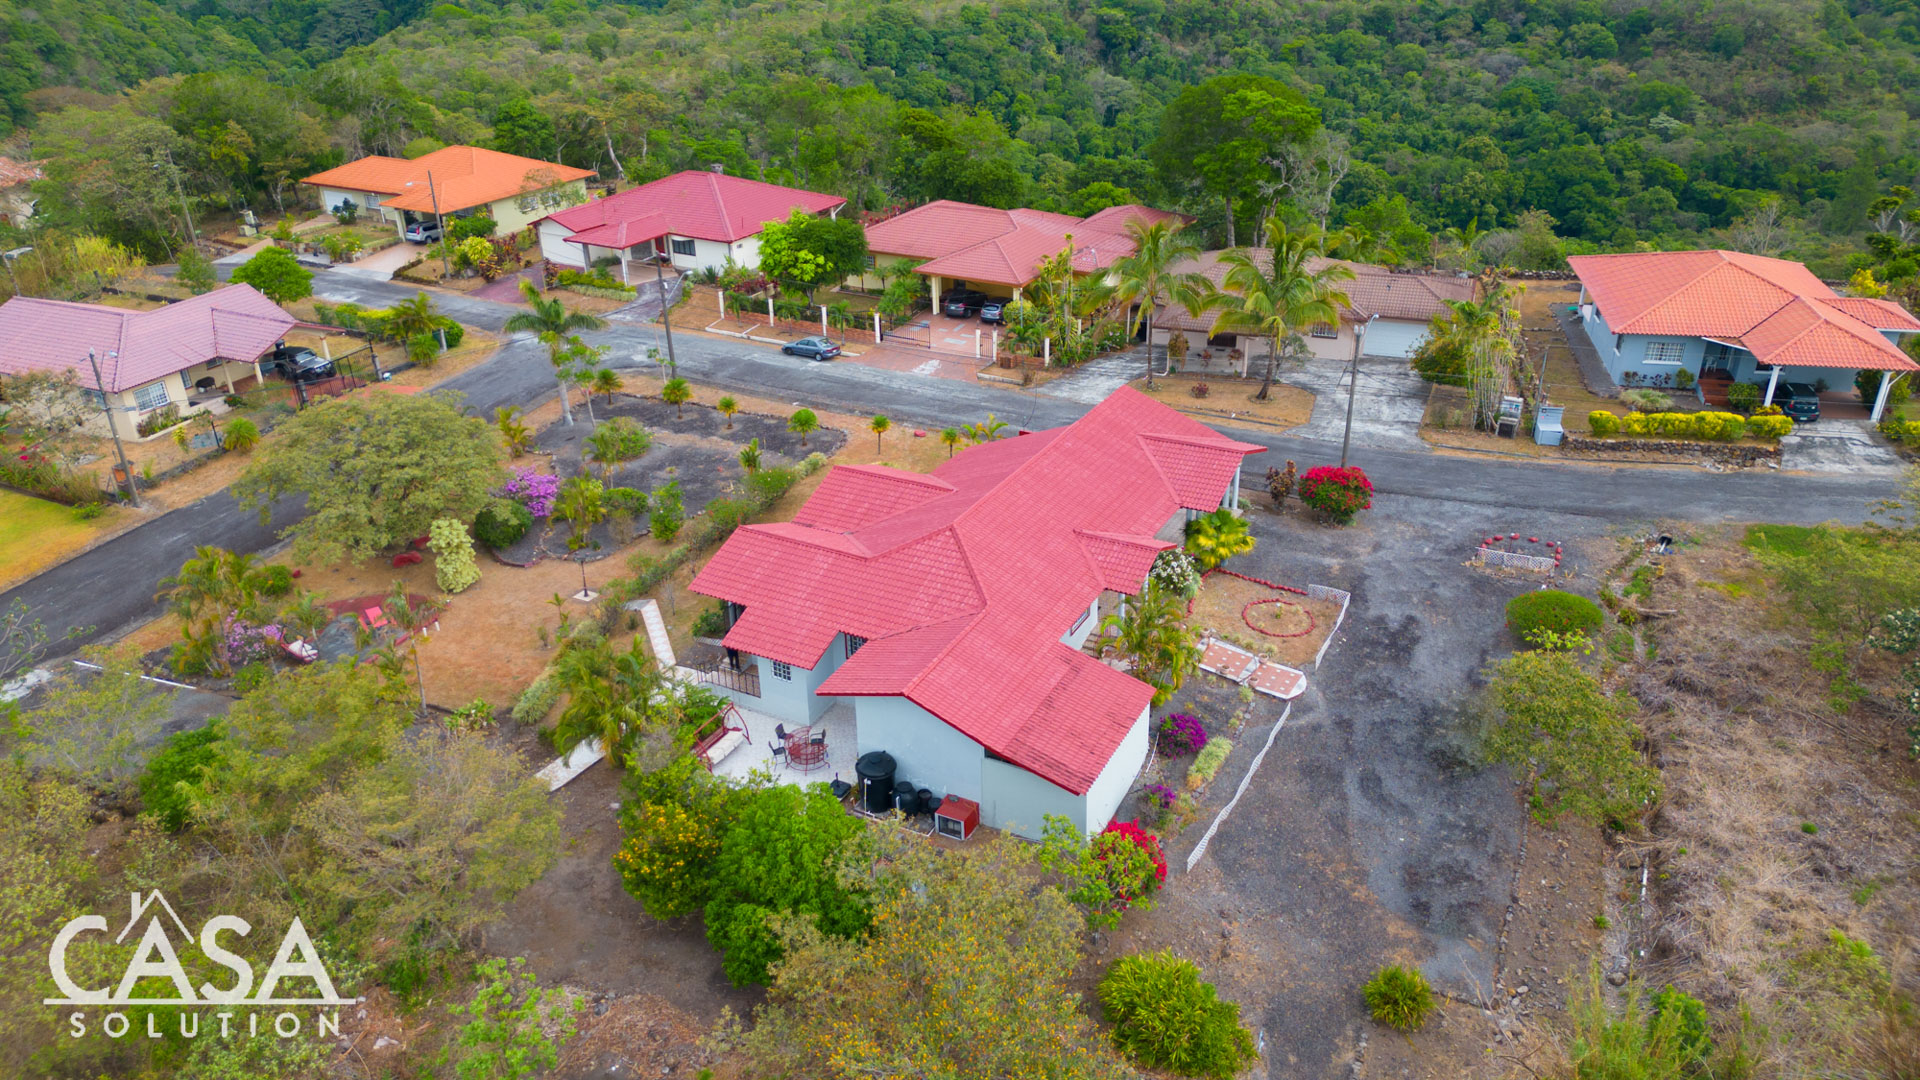 Charming 3,081 sq. ft. Mountain Home on Double Lot for Sale in Brisas Boqueteñas, Boquete, Panama – A Great House at a Great Value